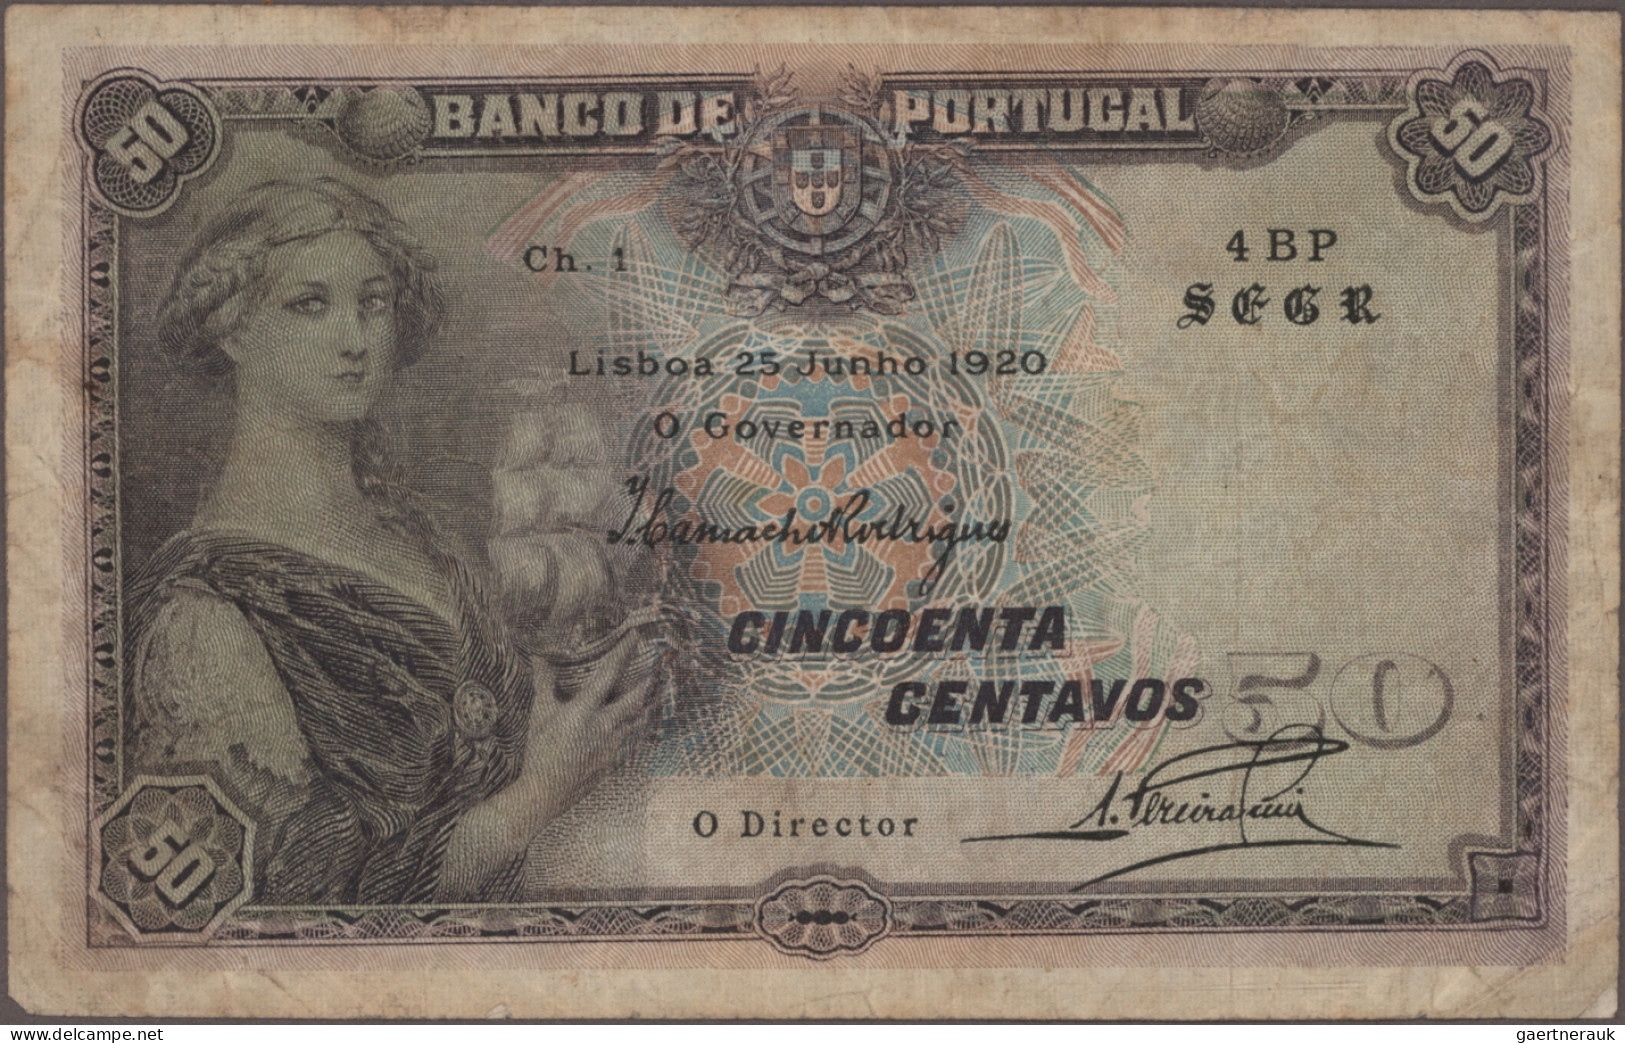 Portugal: Imperial Treasury and Casa da Moeda, lot with 12 banknotes, series 182